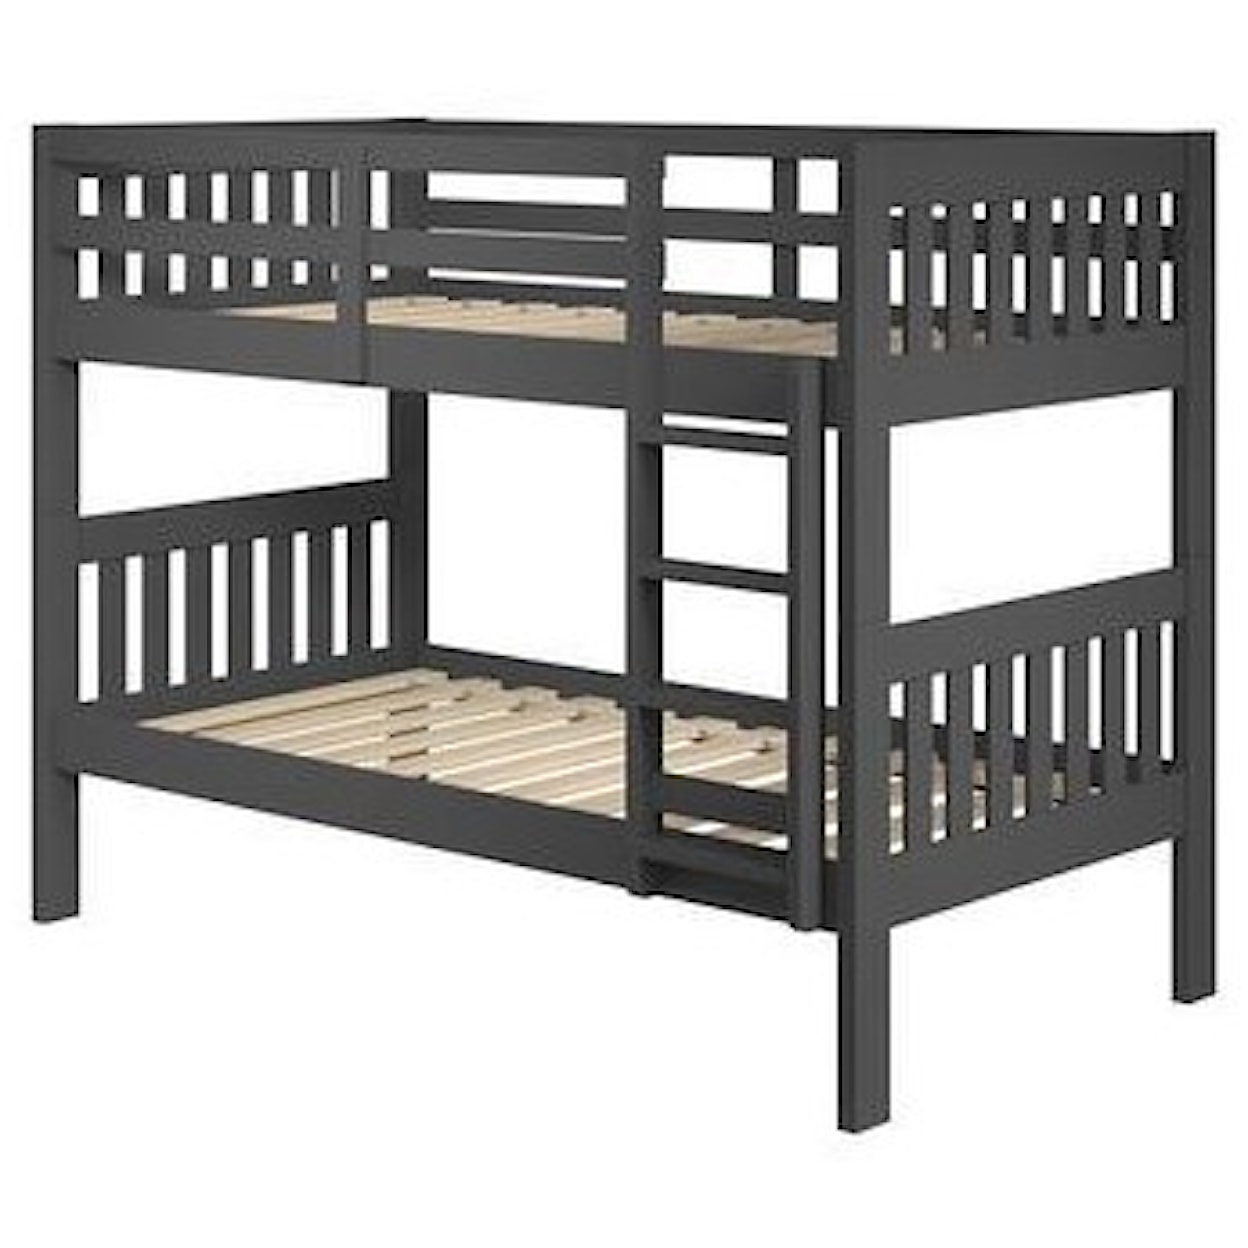 Canal House Bunk Beds Twin-Over-Twin Bunk Bed